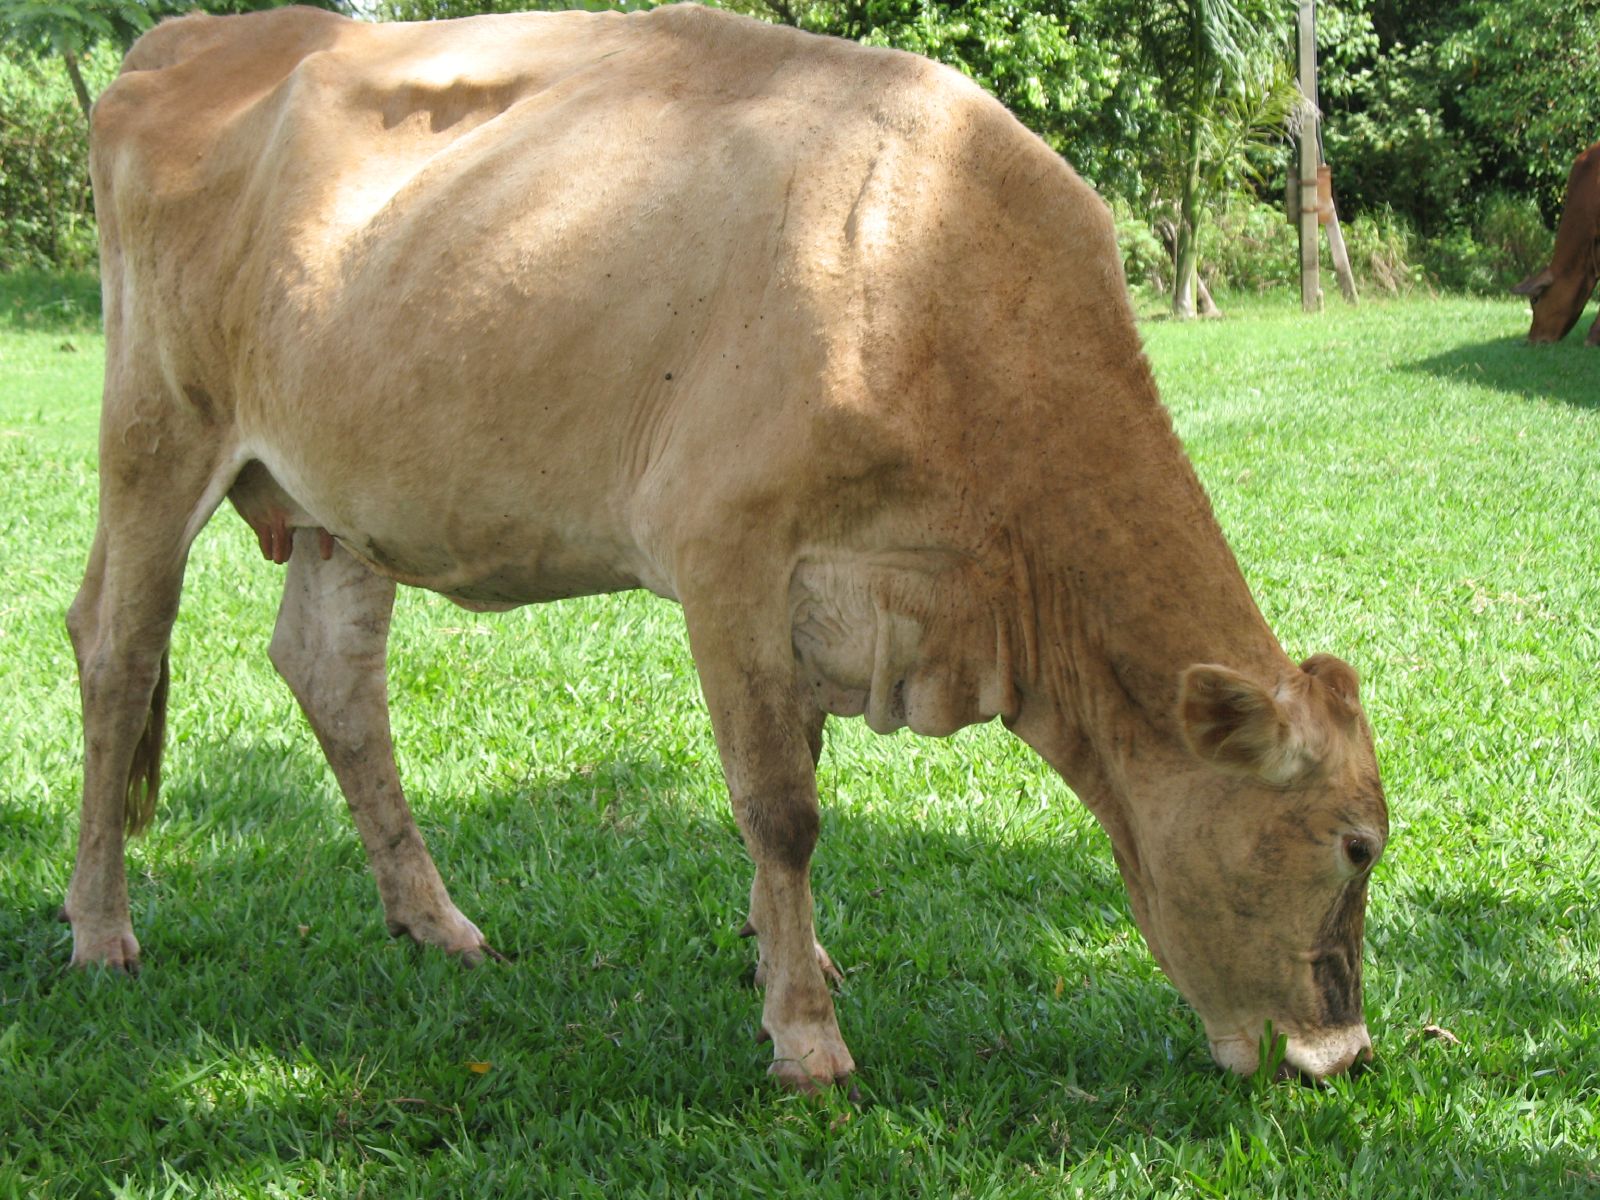 there is a small brown cow that is grazing